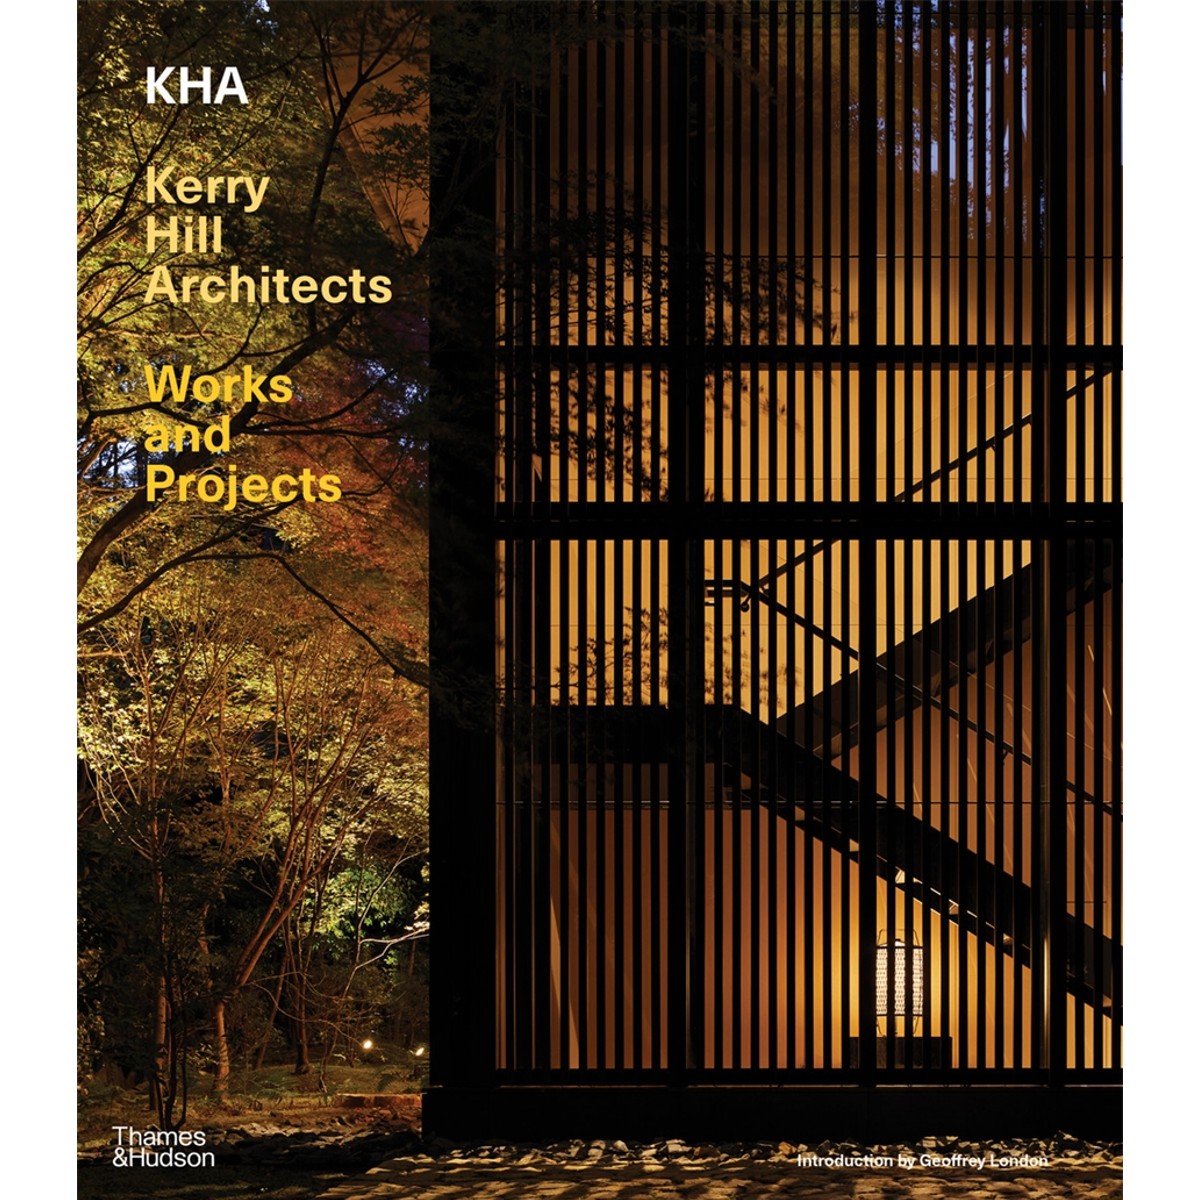 KHA/Kerry Hill Architects : works and projects